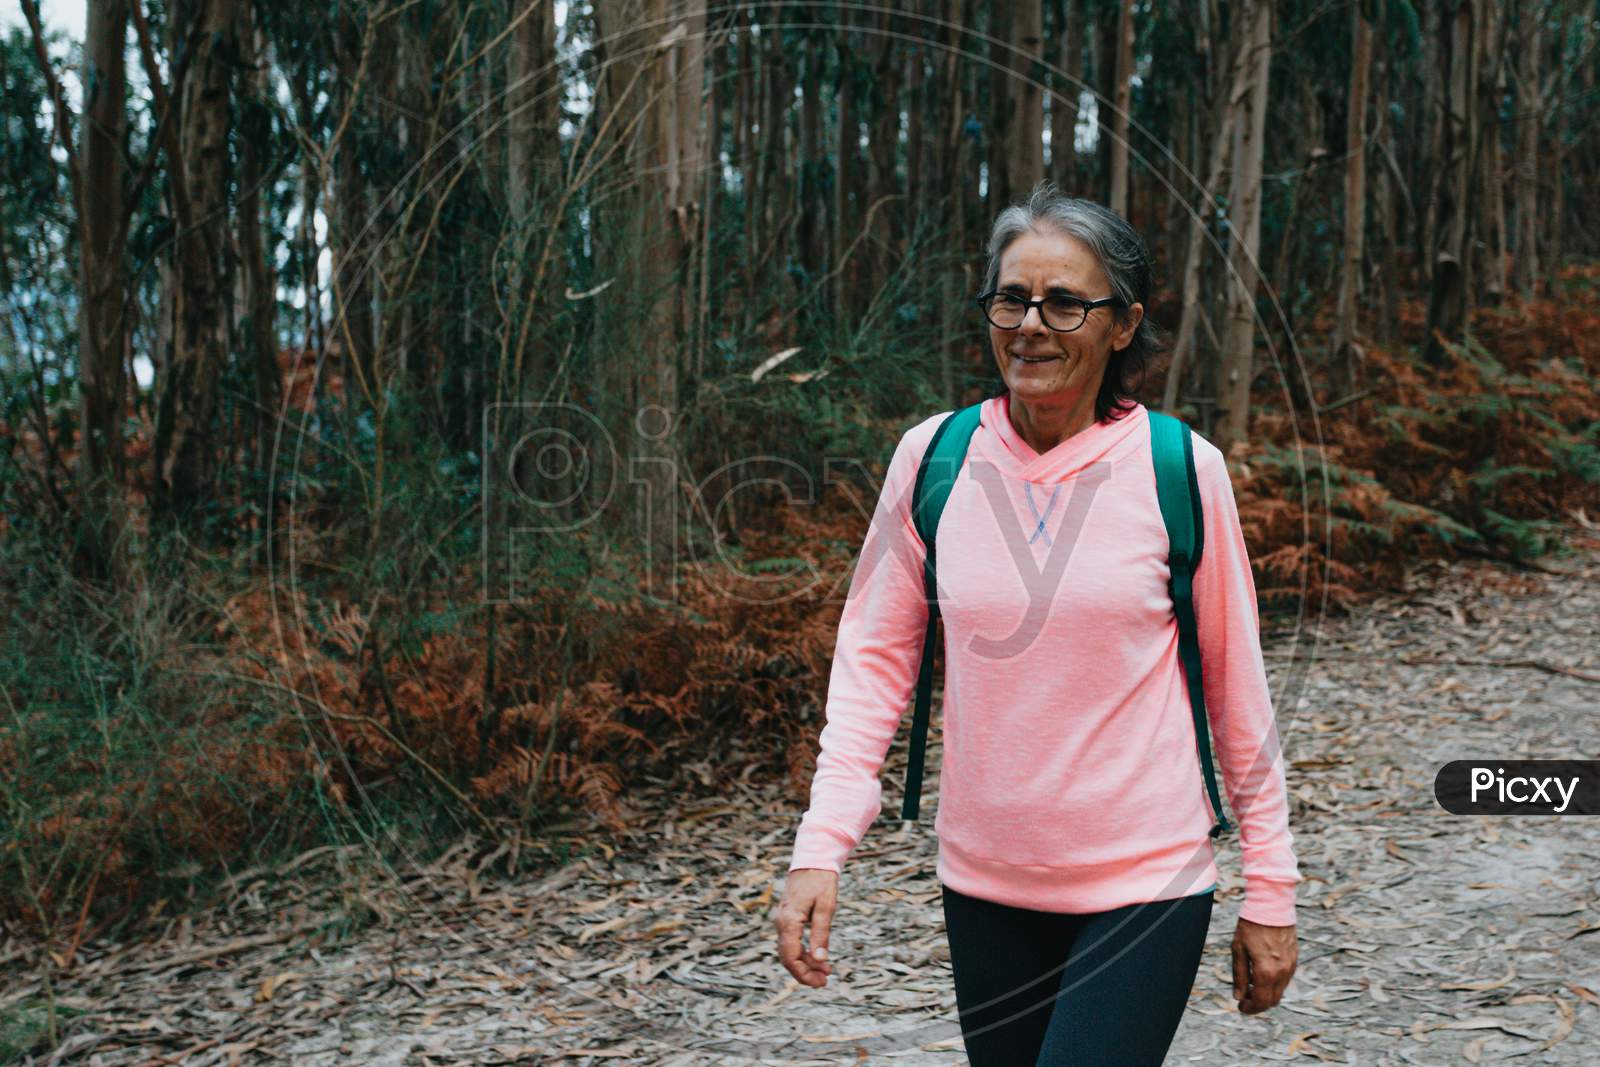 Close Up Of An Old Woman Walking In The Forest With Sport Clothes, Bag And Glasses While Smiling